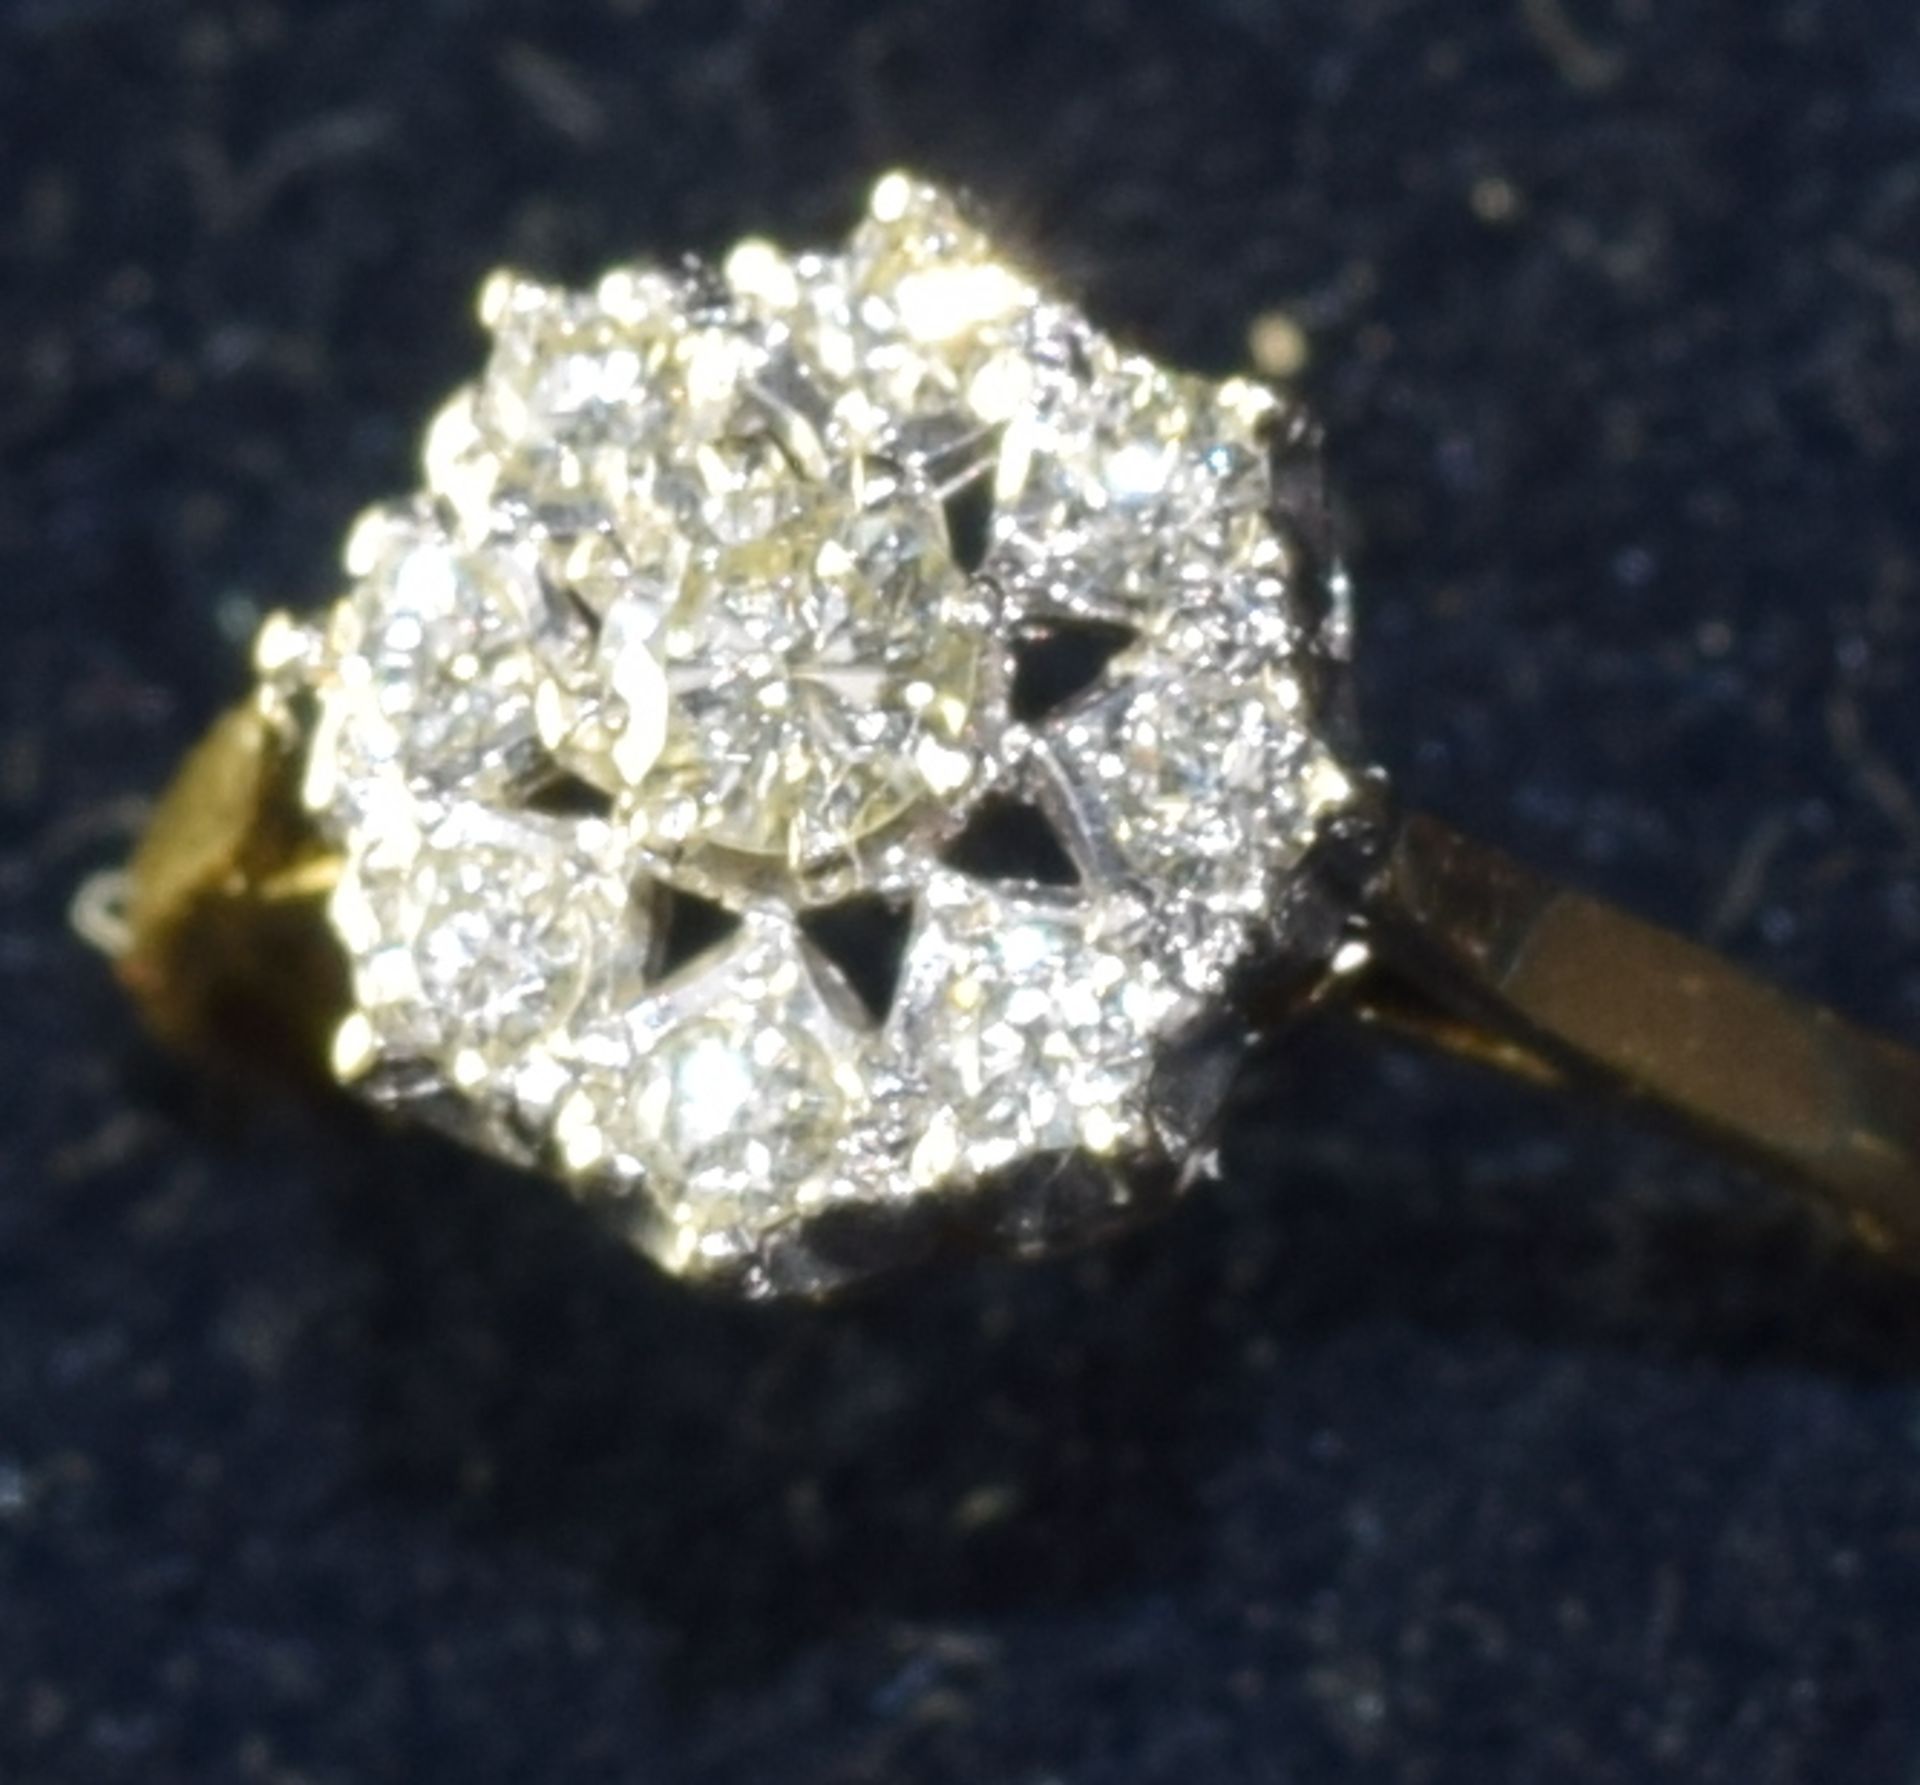 9 Diamond Cluster 18ct Gold Ring - Image 3 of 6